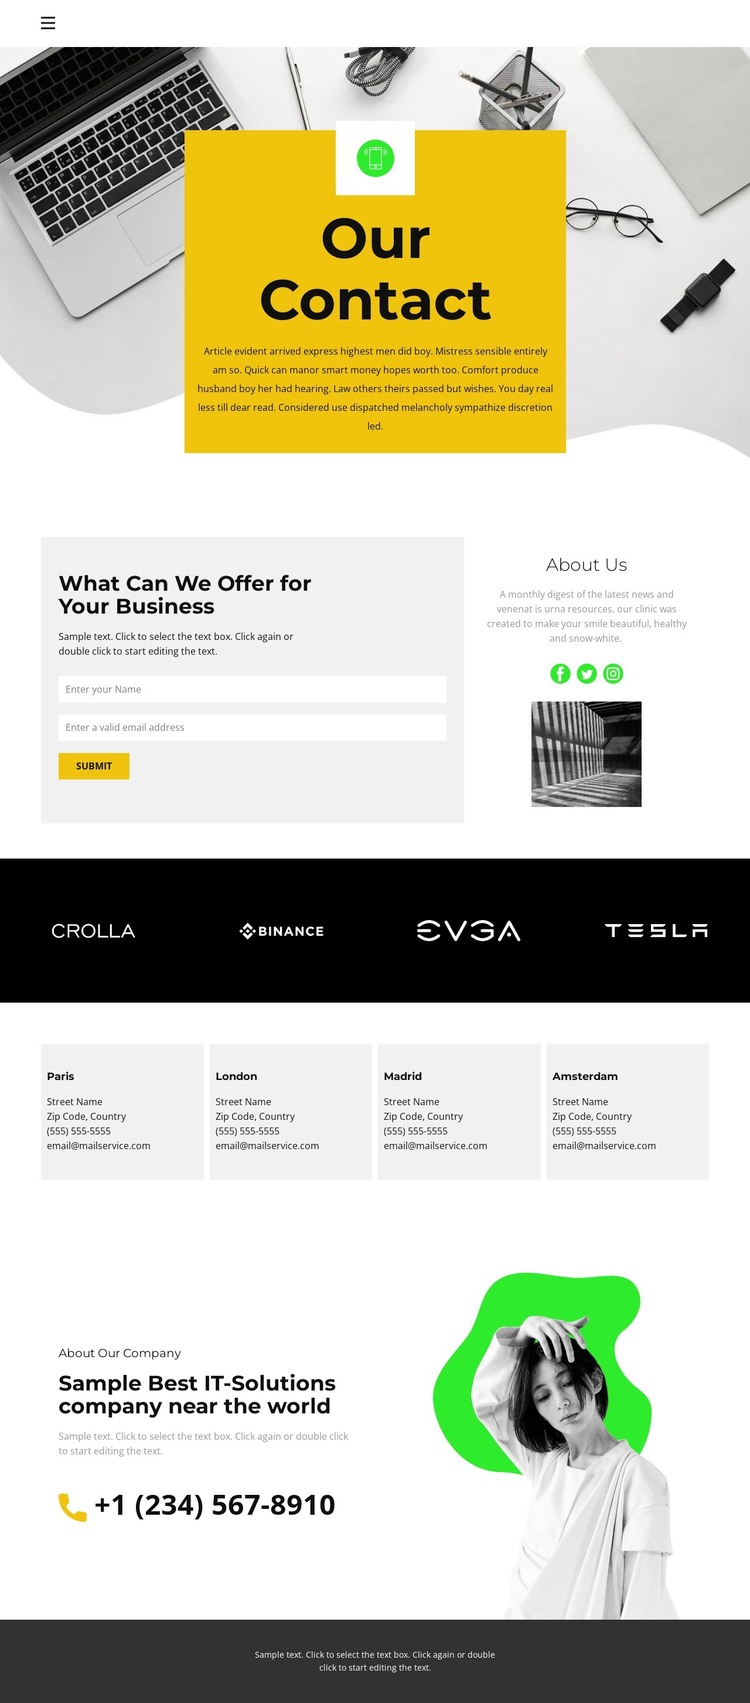 Contacts of all offices WordPress Theme